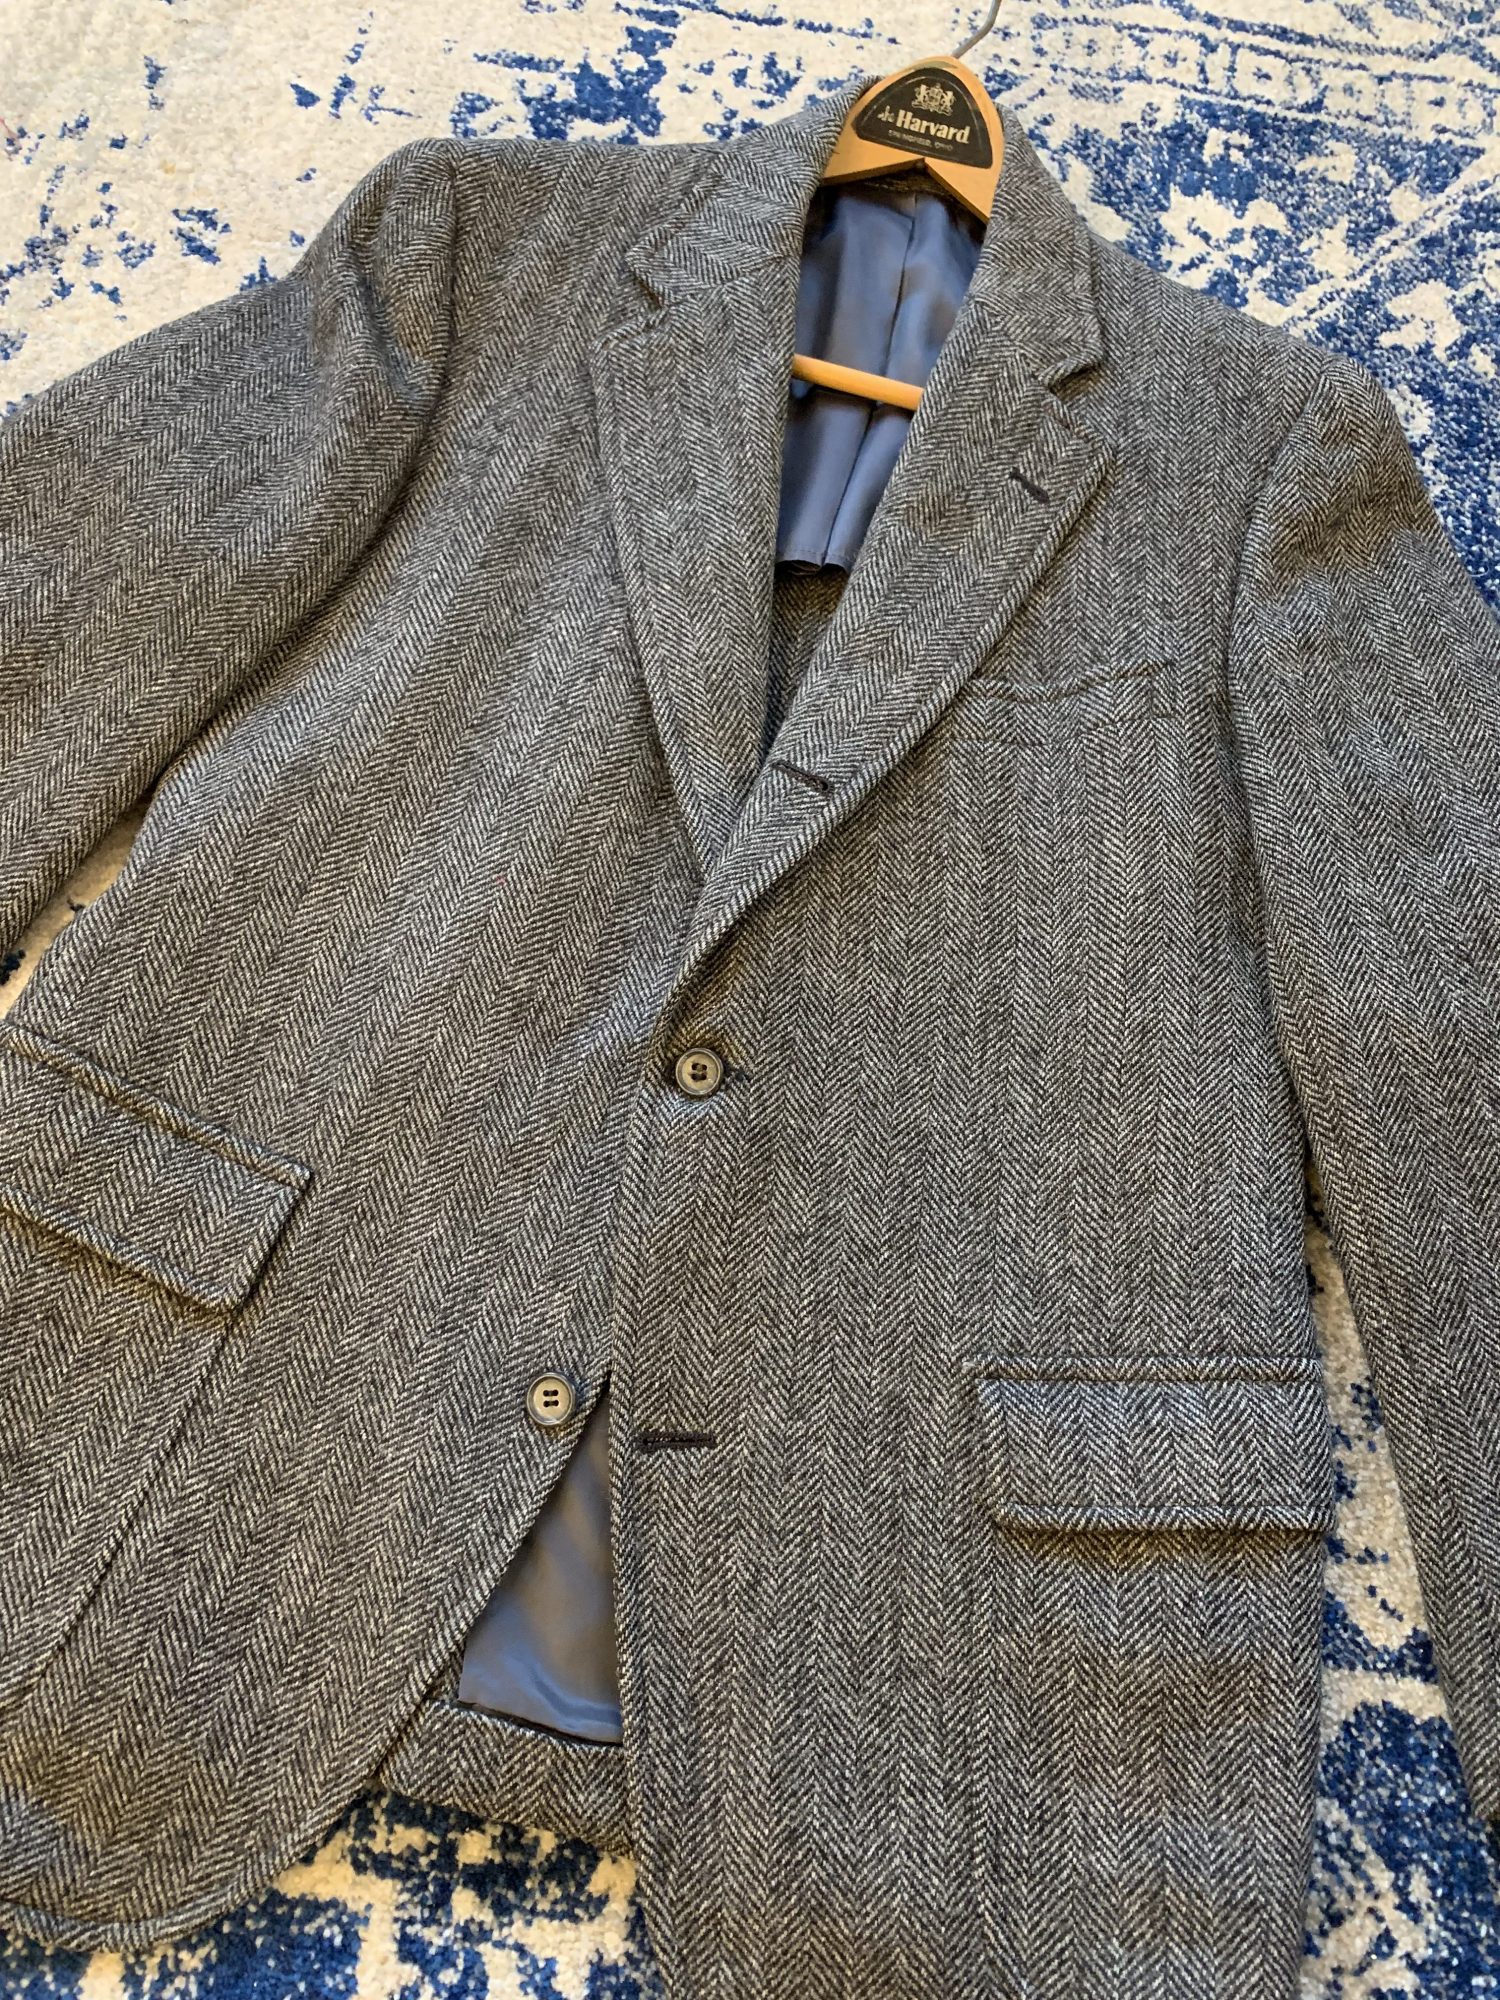 Is This a 3/2 Roll Jacket? | OCBD Blog